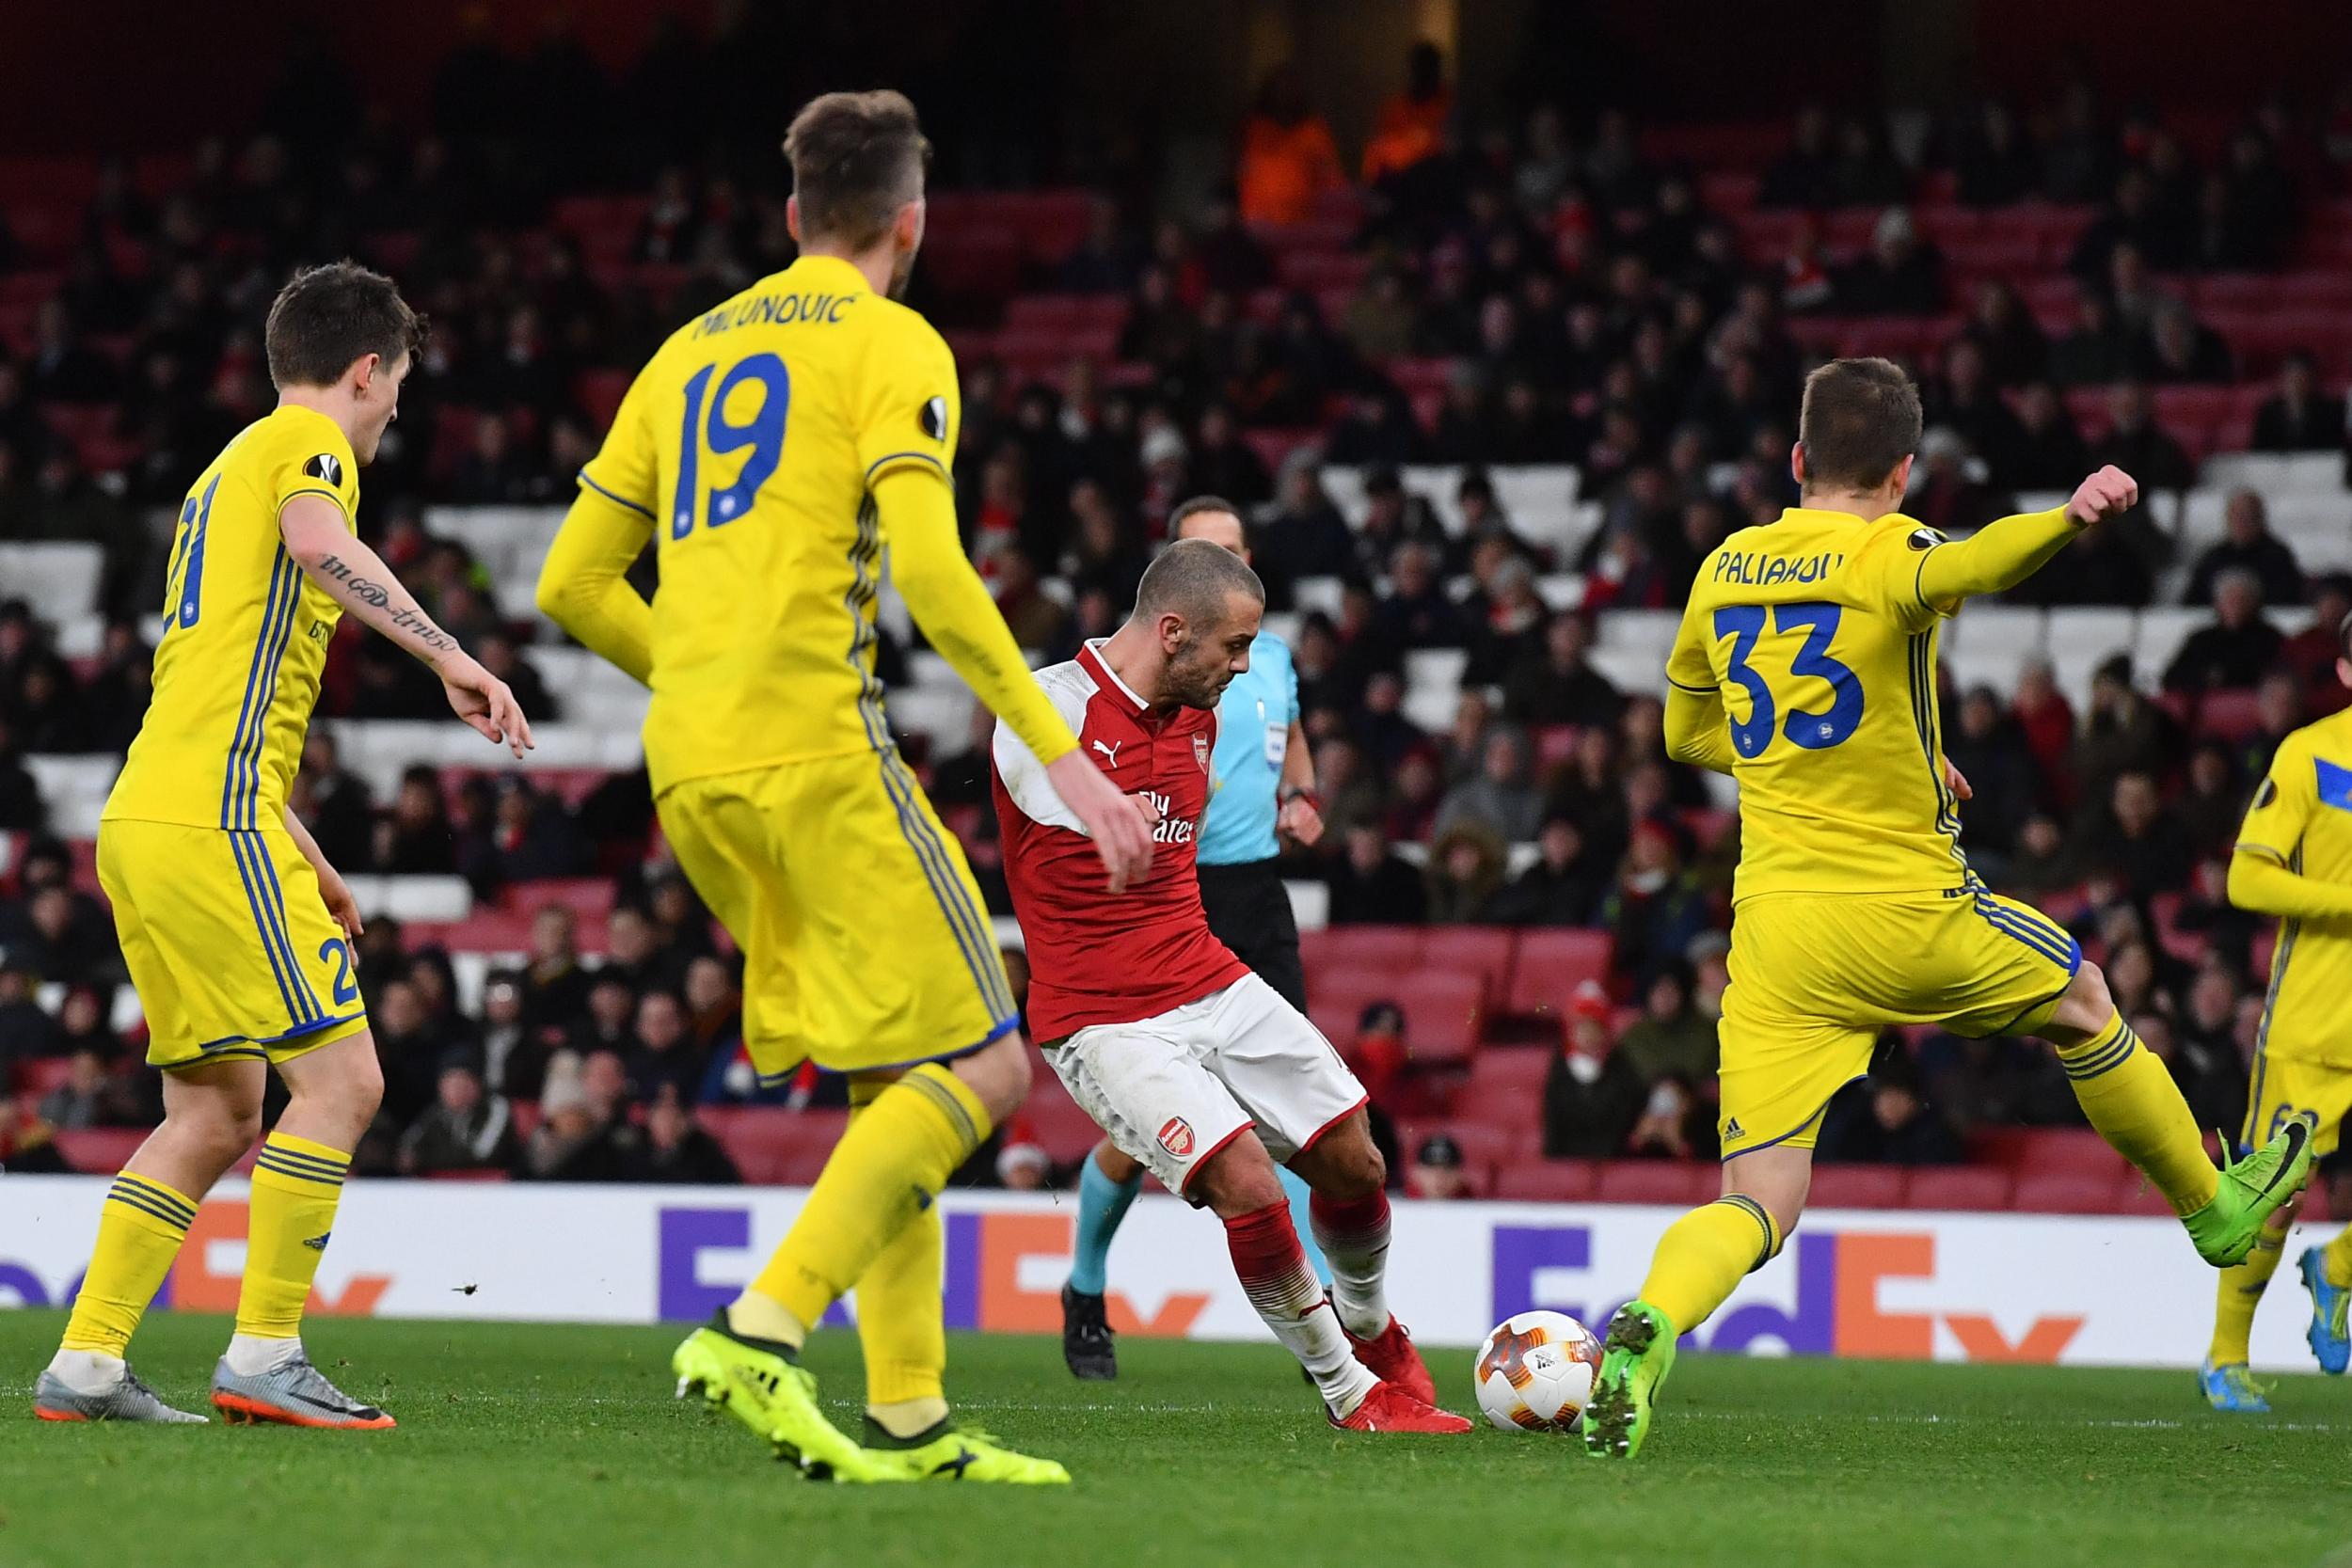 Jack Wilshere scores with a powerful finish